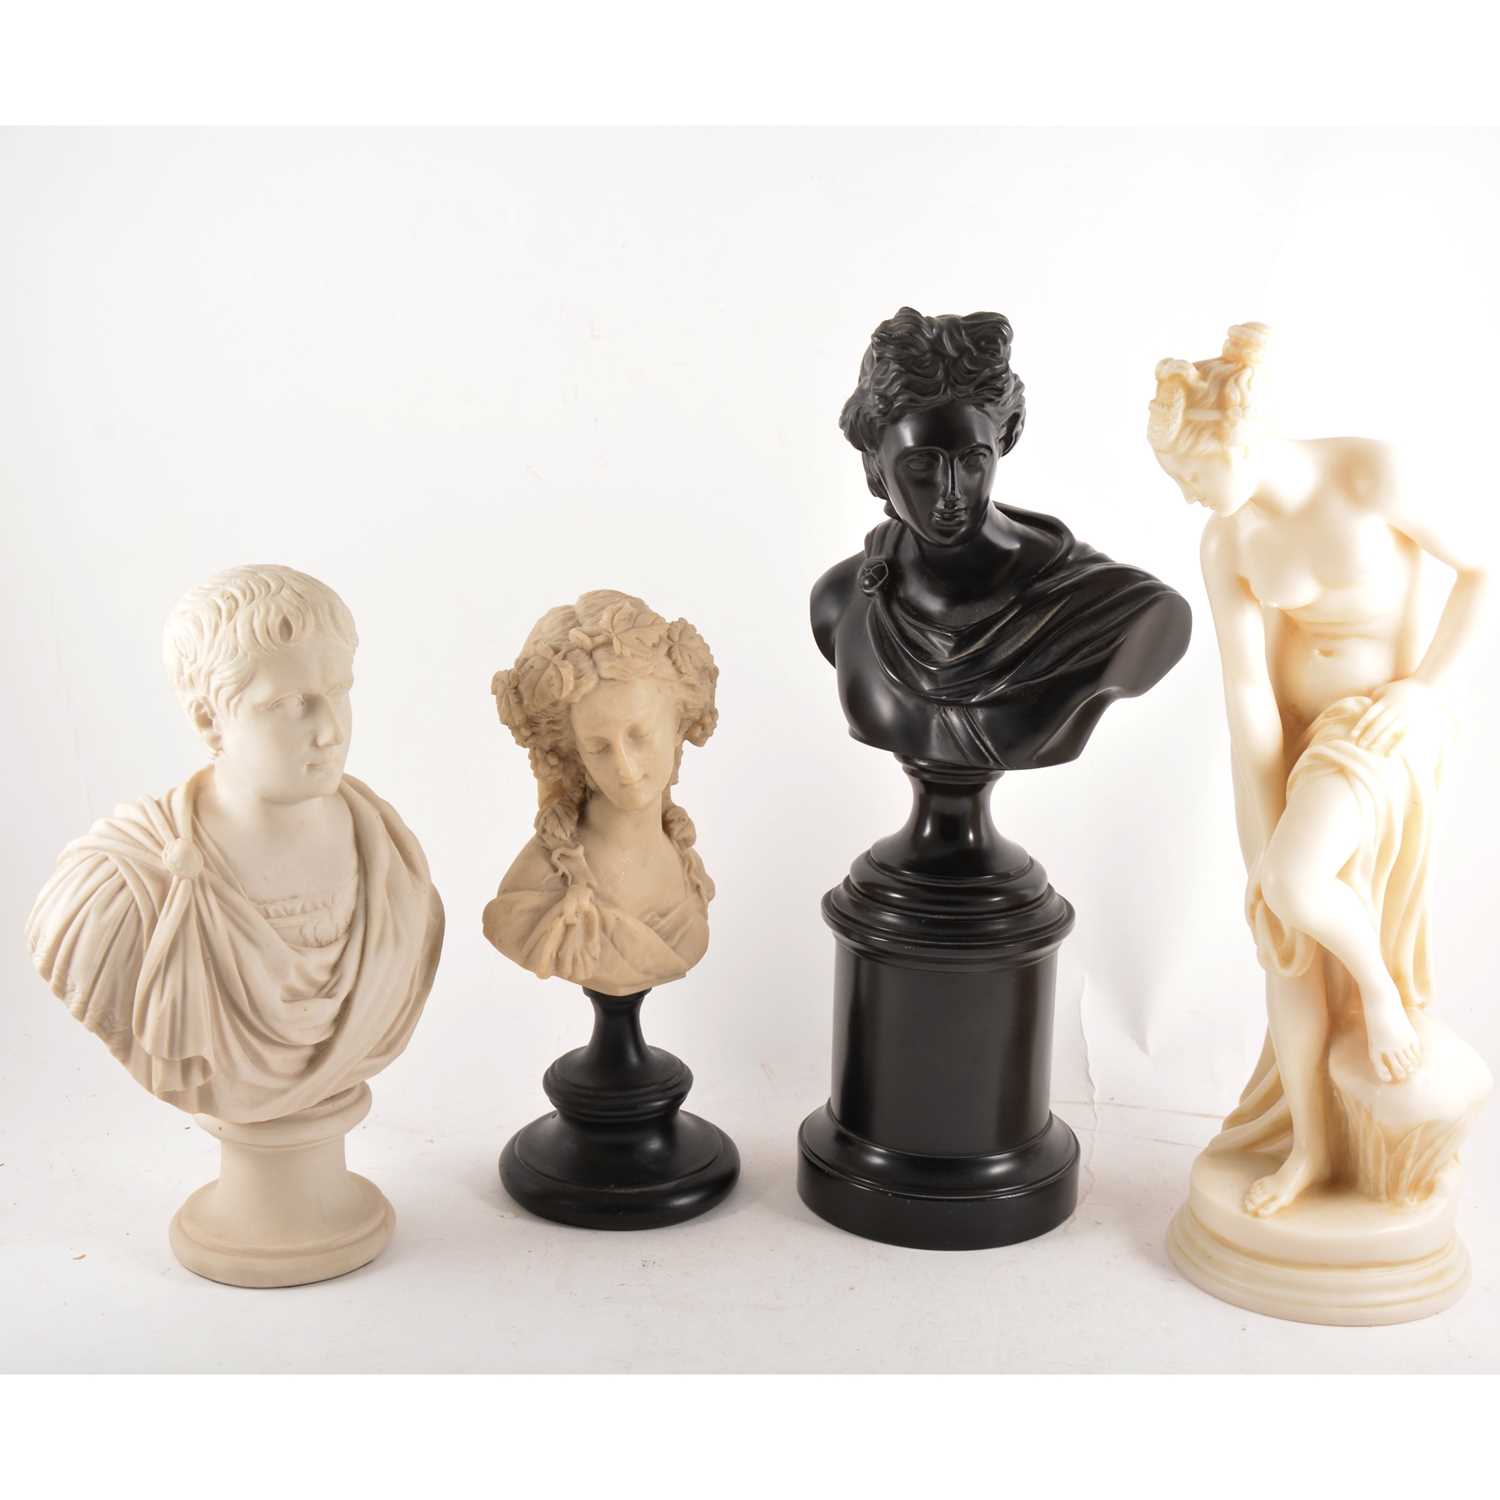 Lot 96 - A reconstituted portrait bust, Emperor Napoleon and other contemporary figures after the Antiques